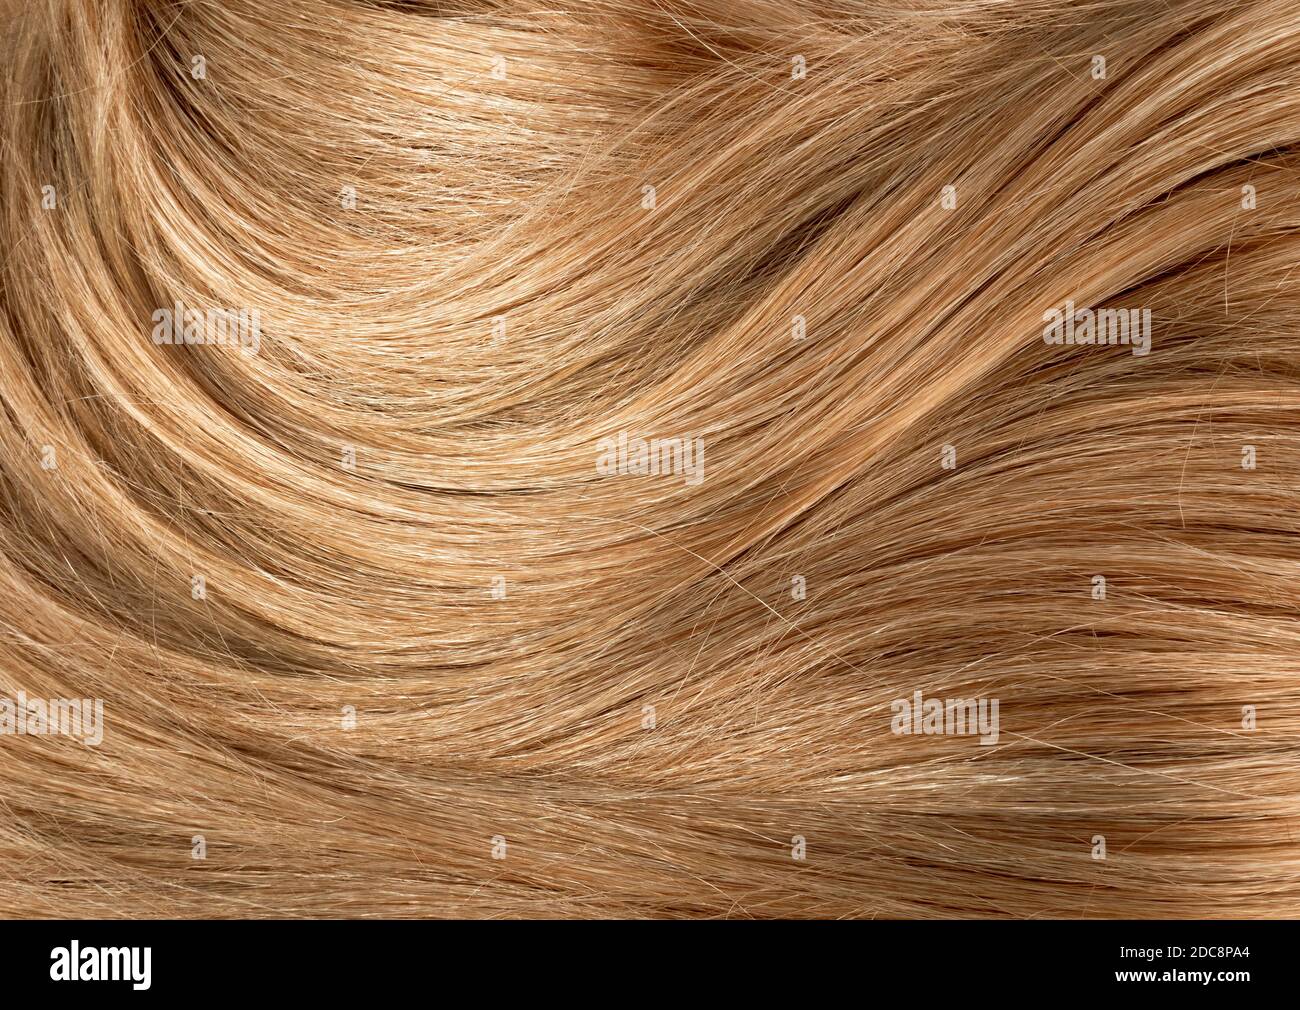 Long blond human shiny hair background. Blond Hair Texture Stock Photo